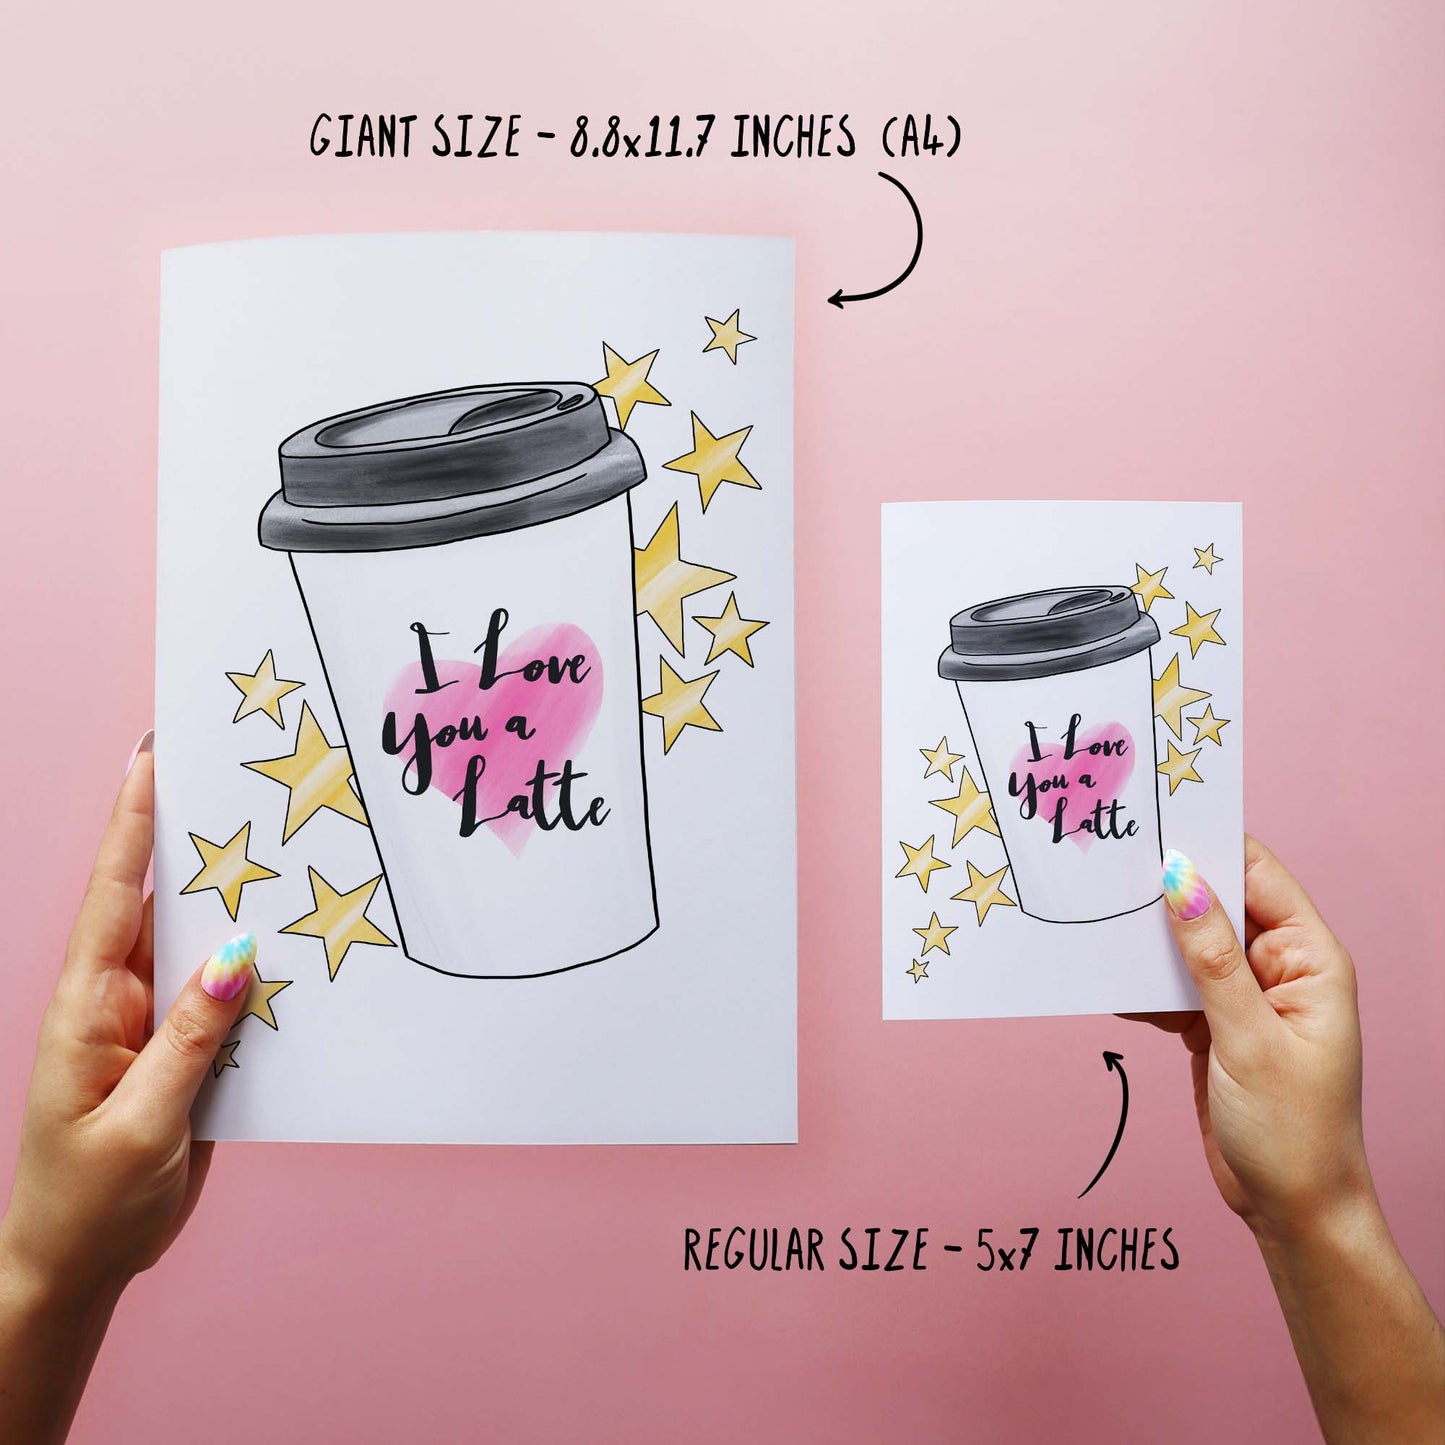 I Love You A Latte - Funny Valentine's Day Card